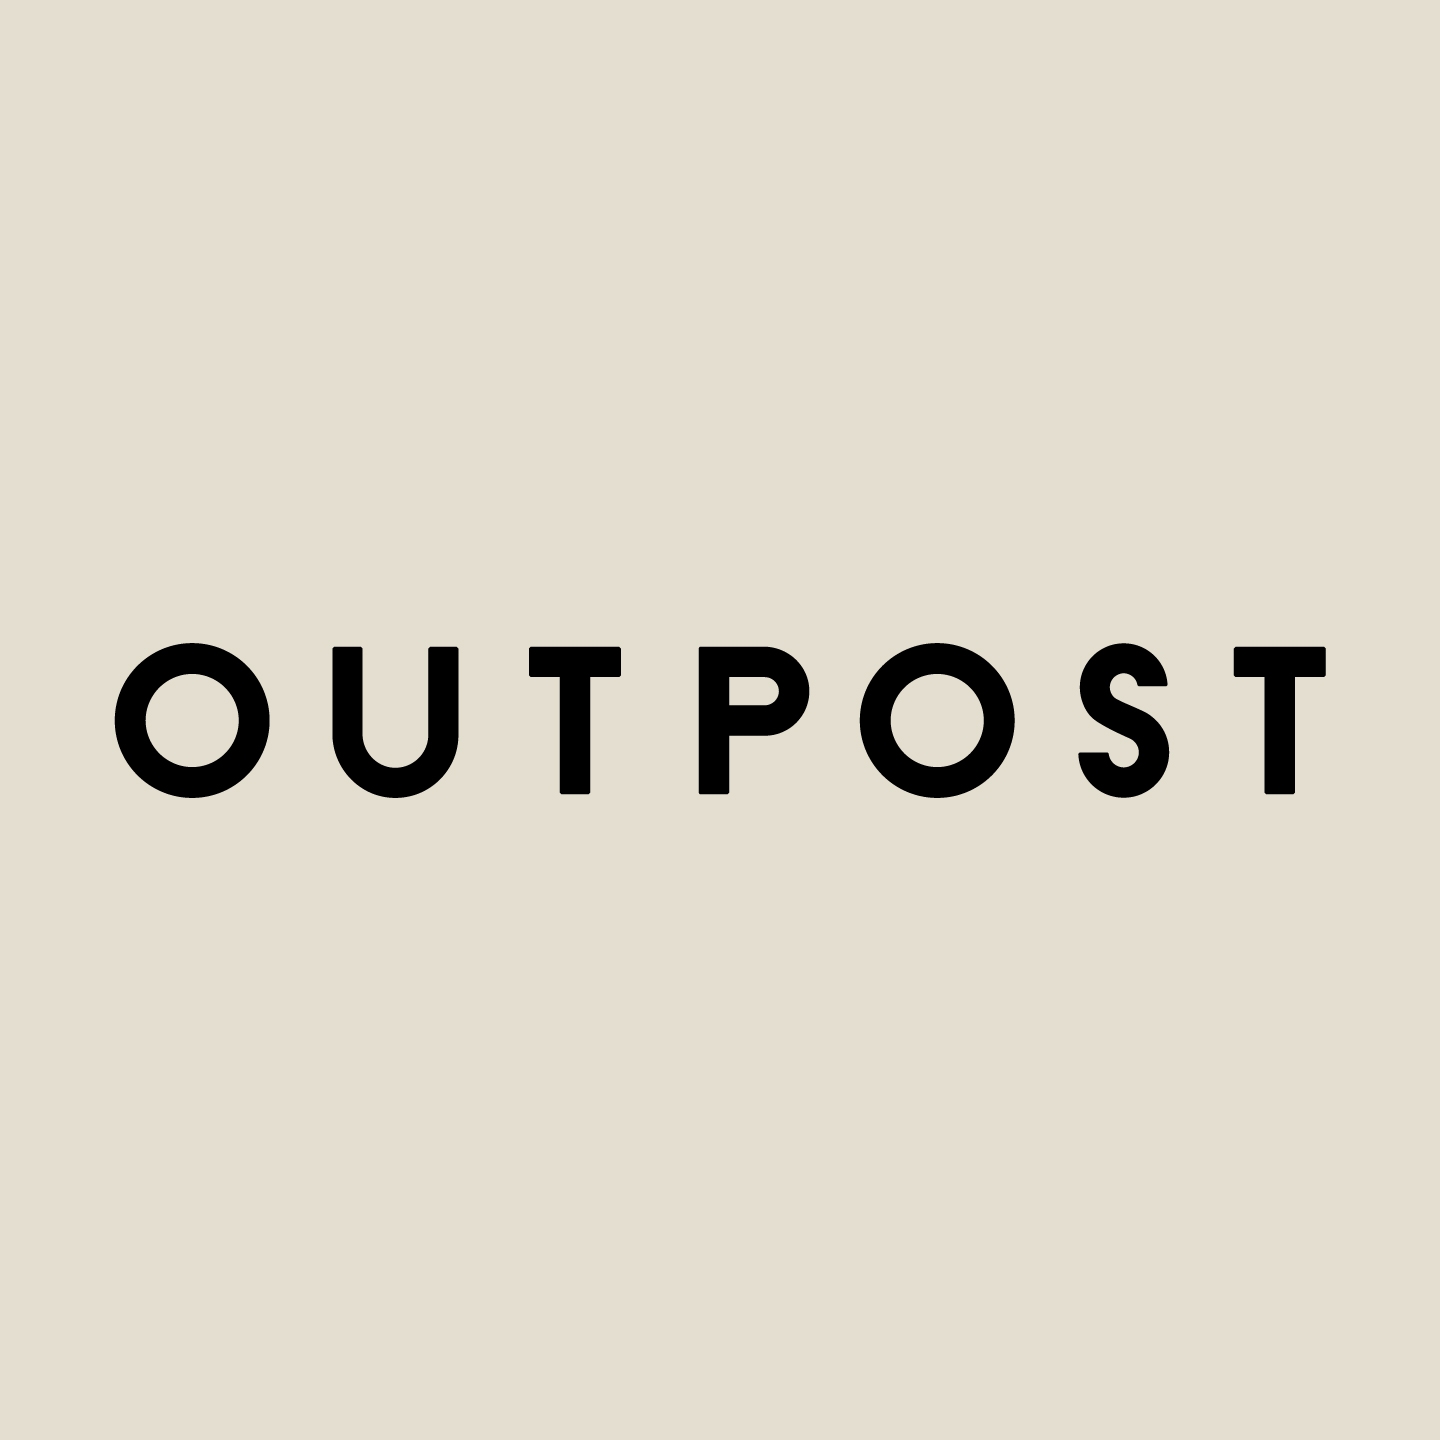 Outpost Companies